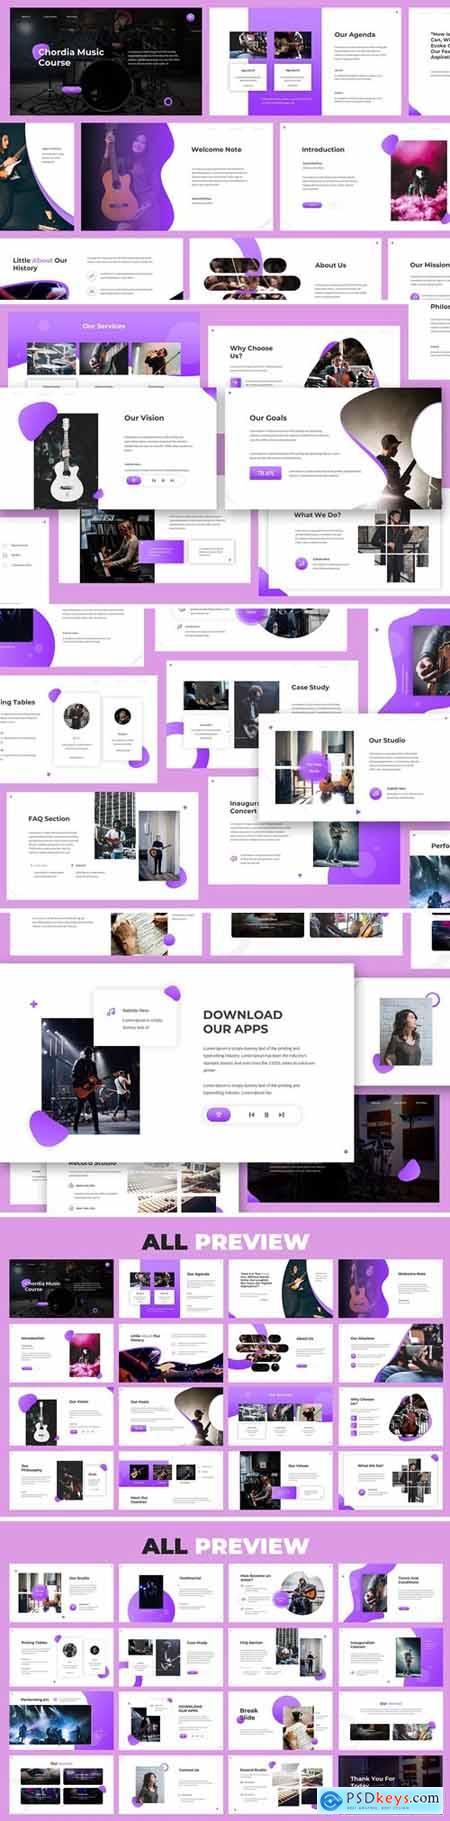 Chordia - Music Powerpoint Template 3954821